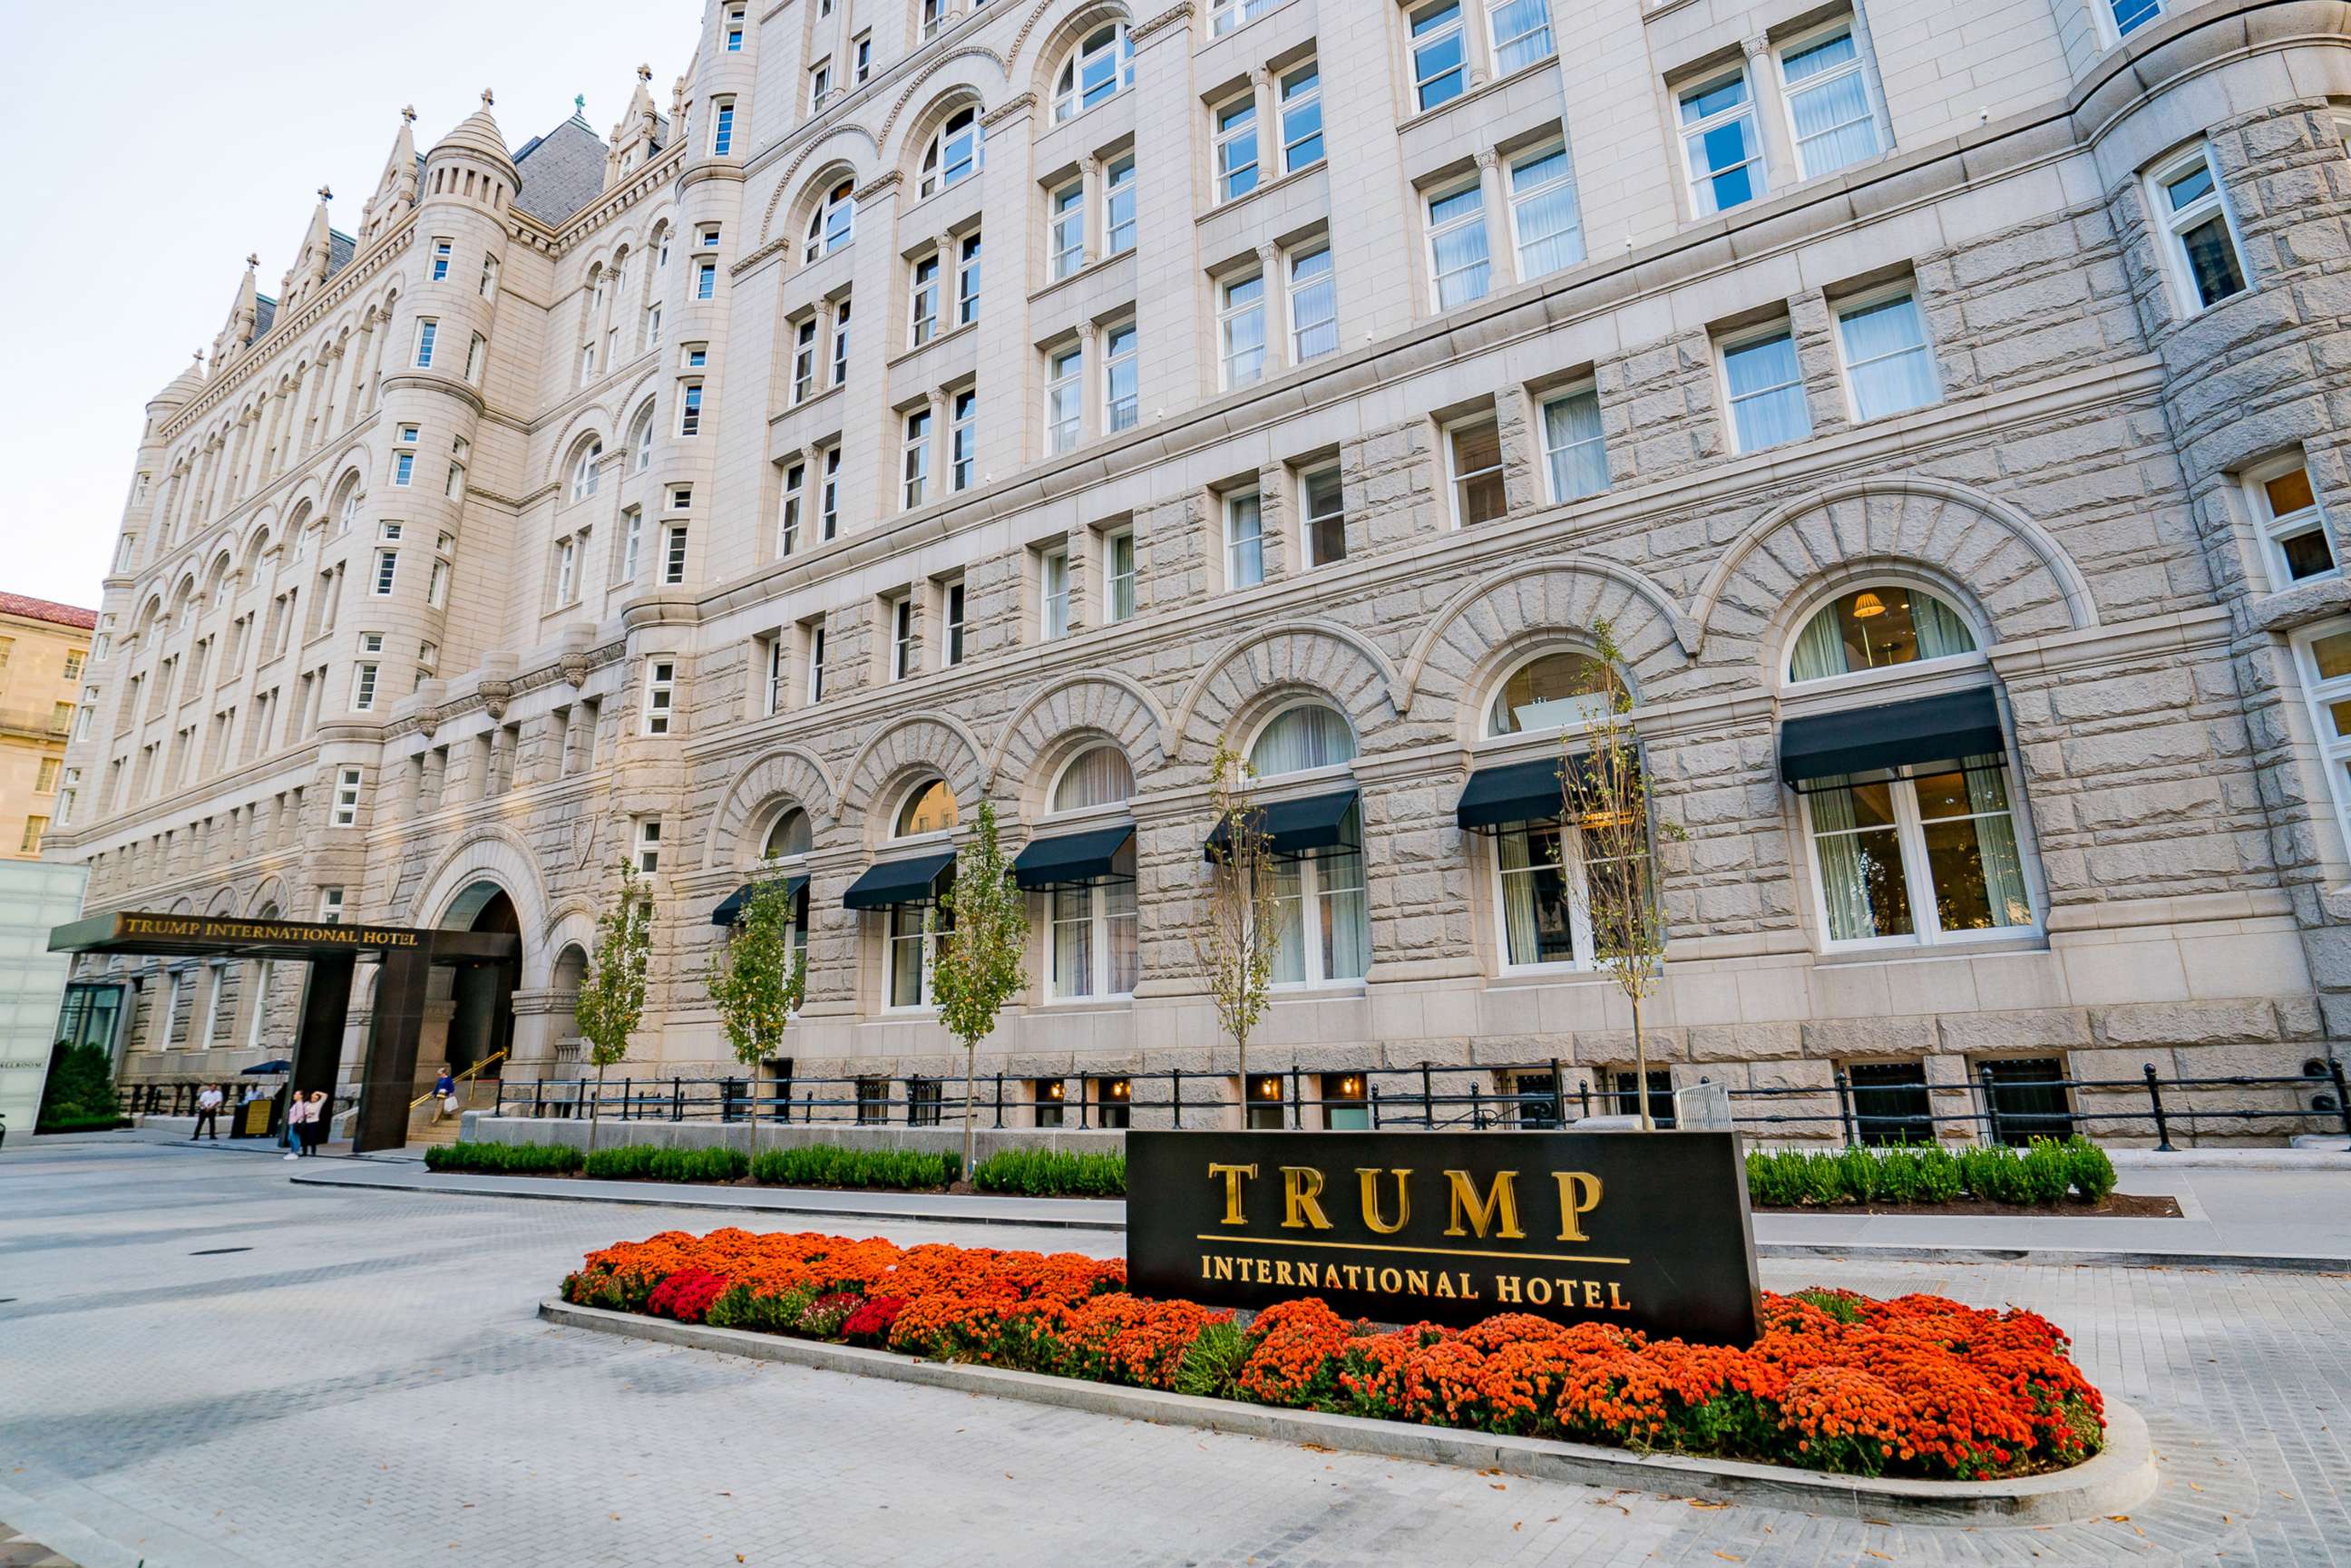 PHOTO: A general view of the Trump International Hotel in Washington, D.C. at the Old Post Office, Oct. 30, 2016.